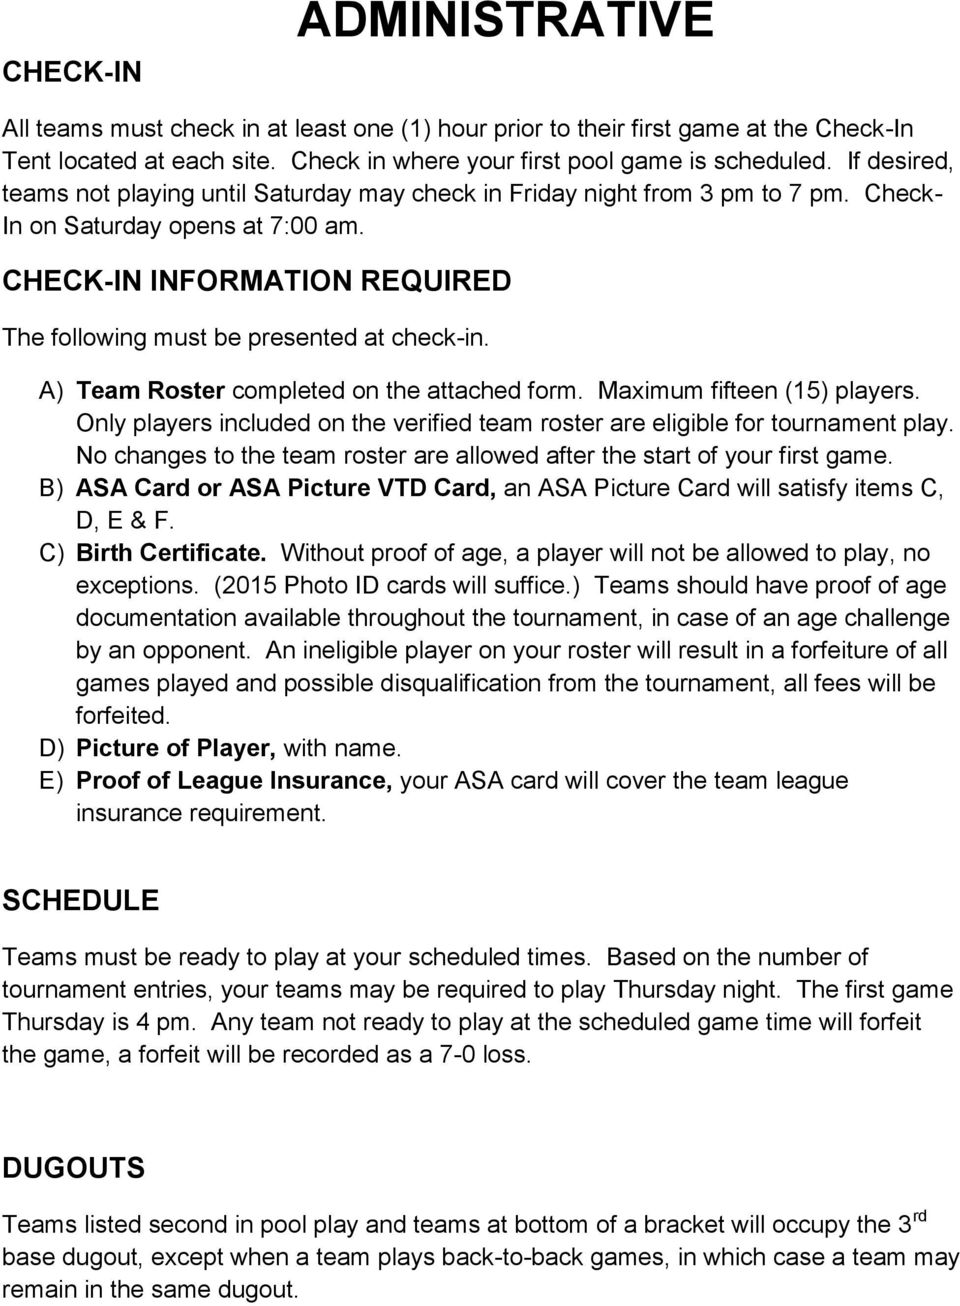 CHECK-IN INFORMATION REQUIRED The following must be presented at check-in. A) Team Roster completed on the attached form. Maximum fifteen (15) players.